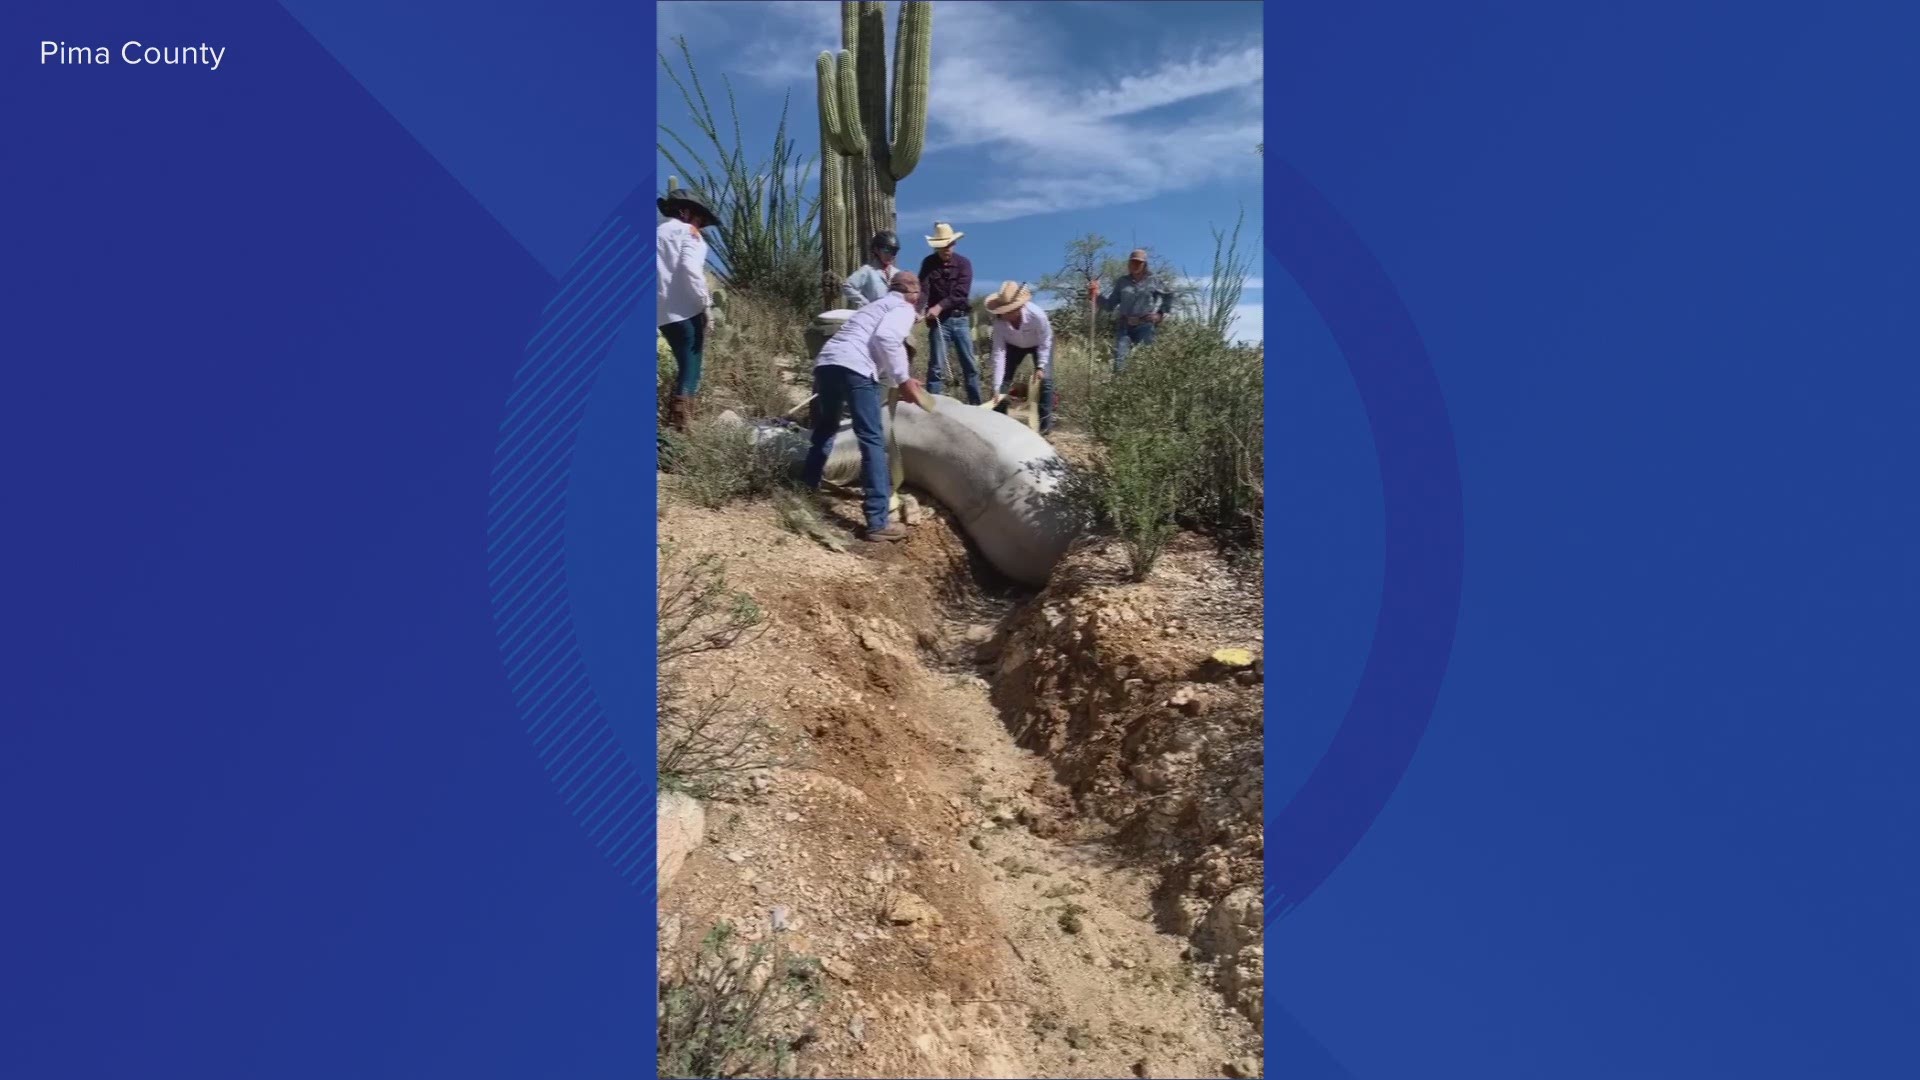 The horse was rescued and is doing well. The incident happened Sunday at Tanque Verde Ranch.